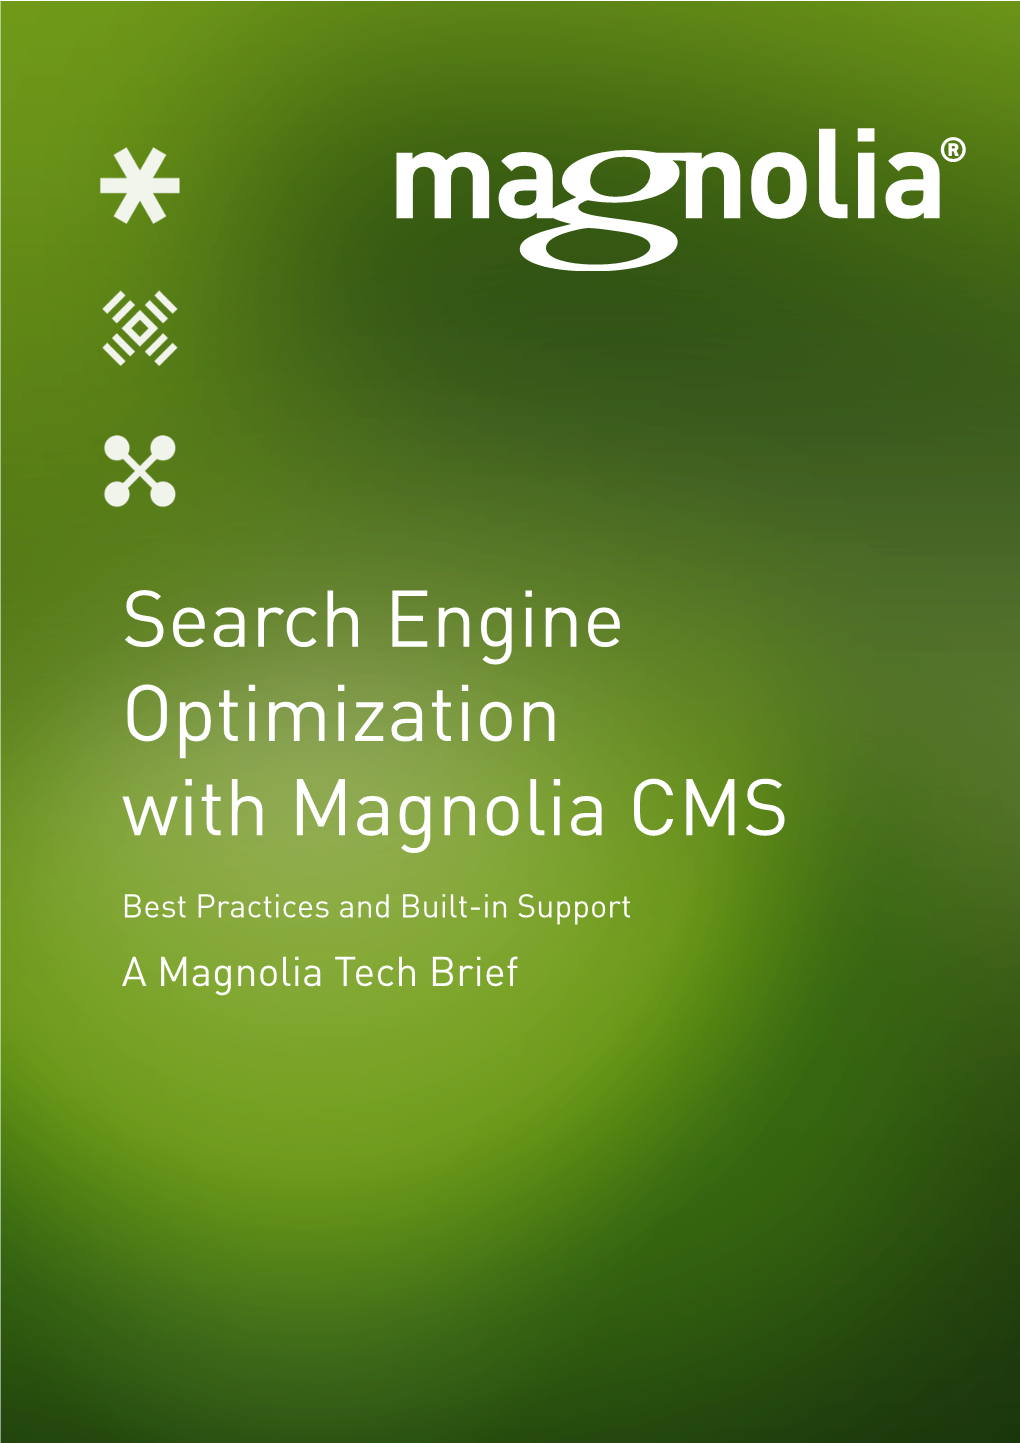 Search Engine Optimization with Magnolia CMS